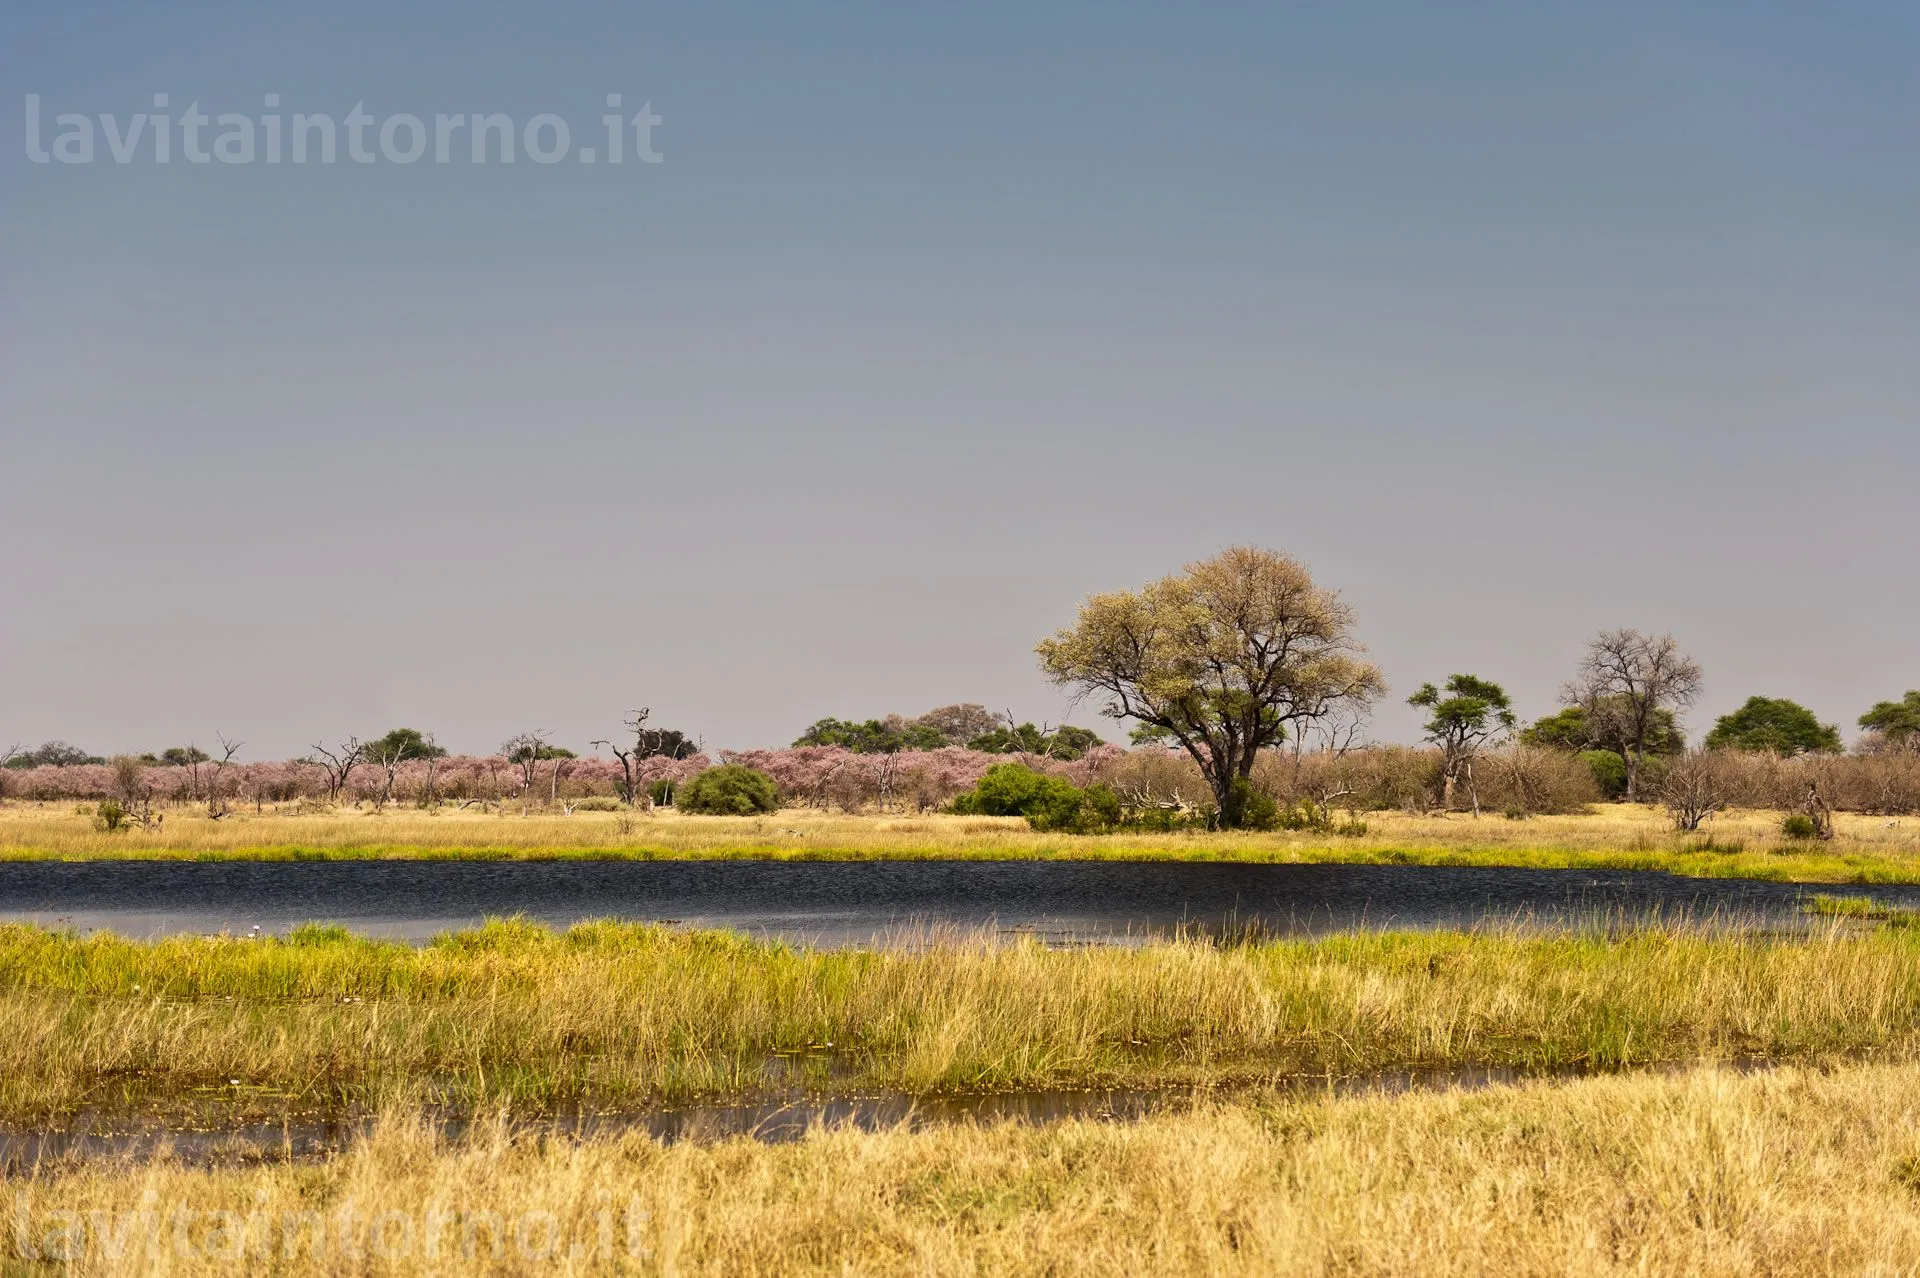 Chobe National Park: afternoon